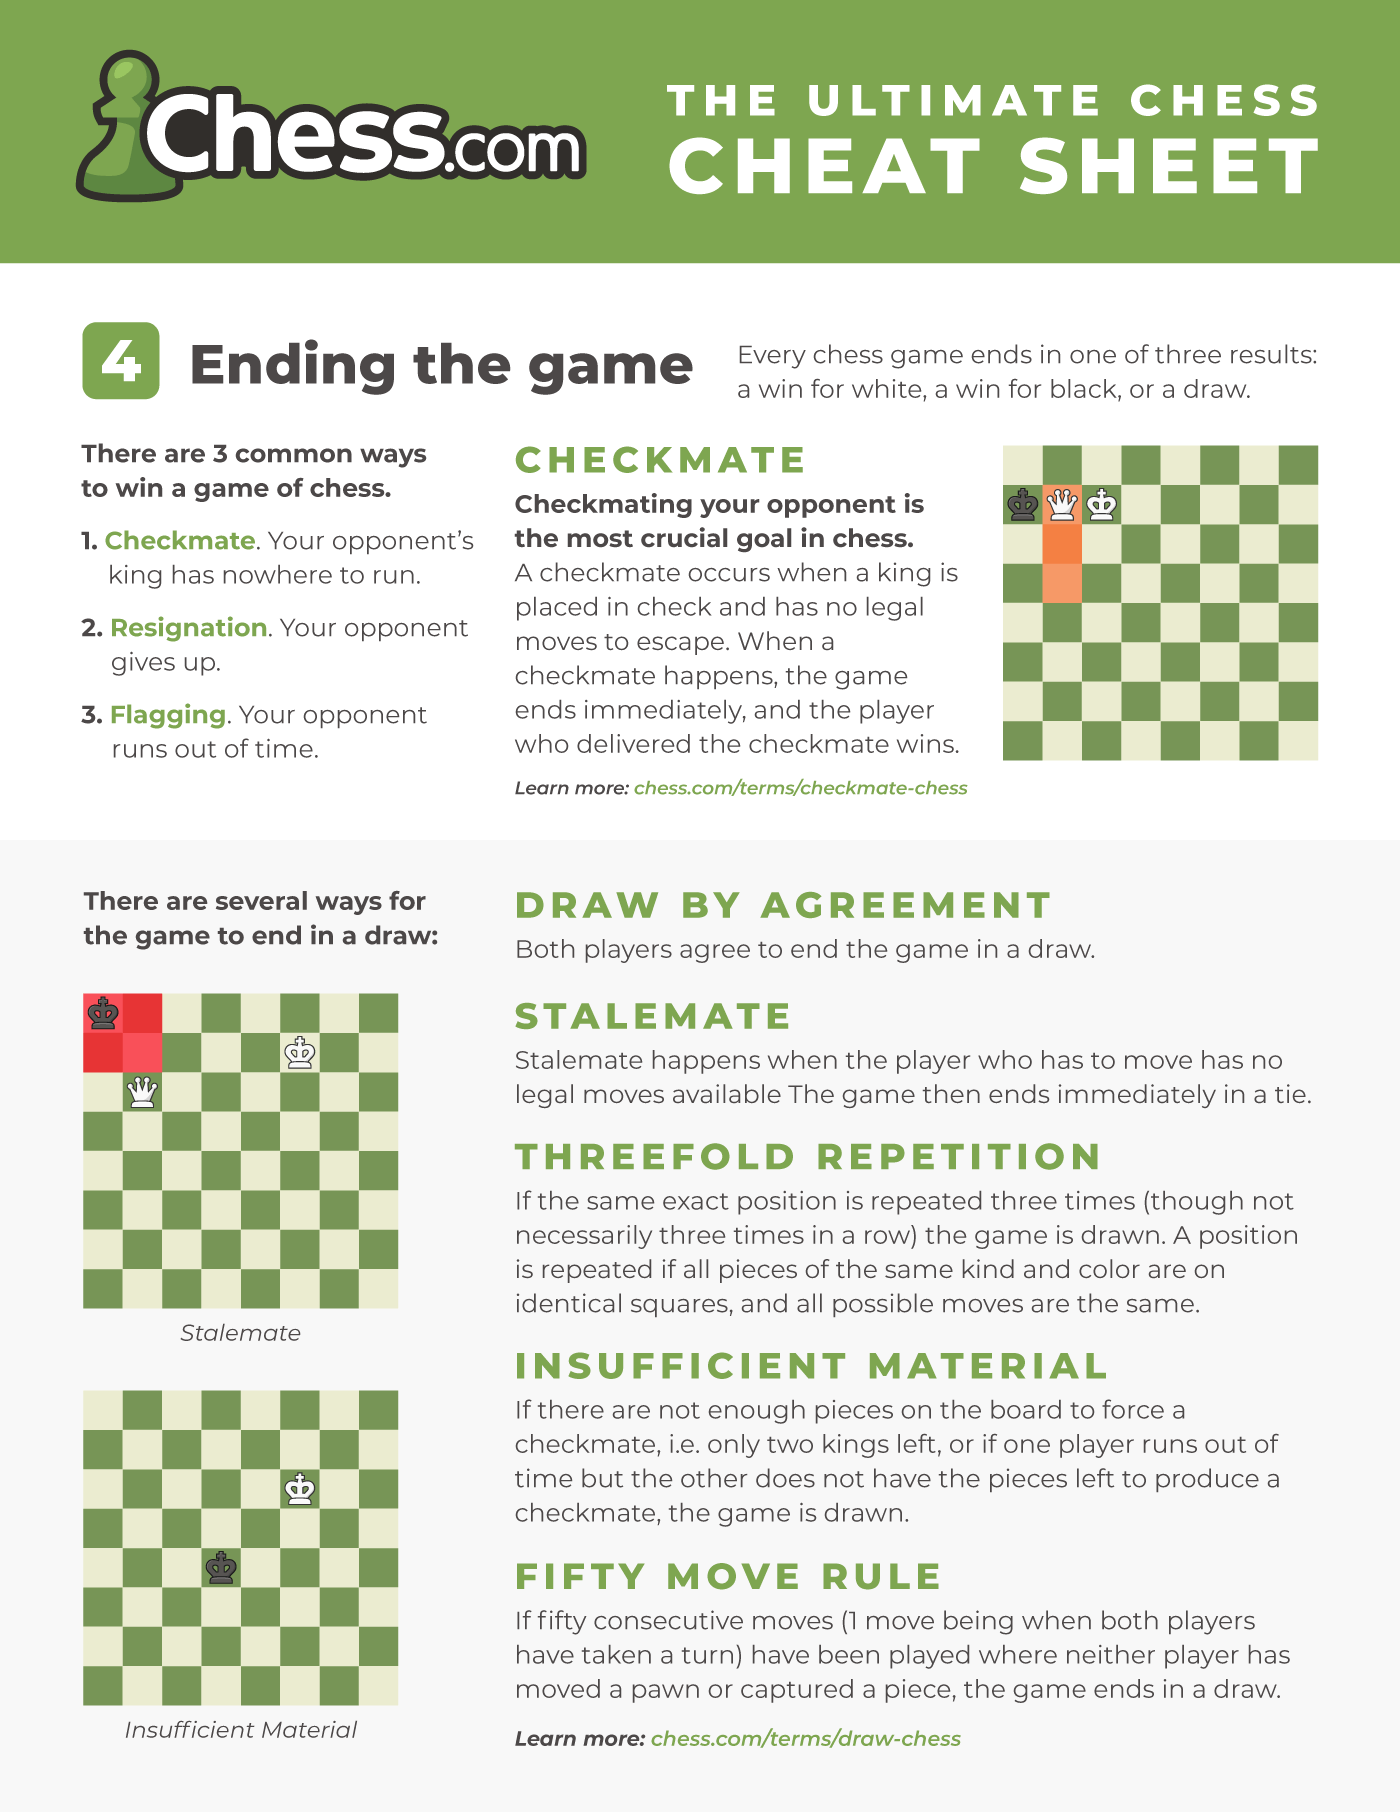 Chess rules